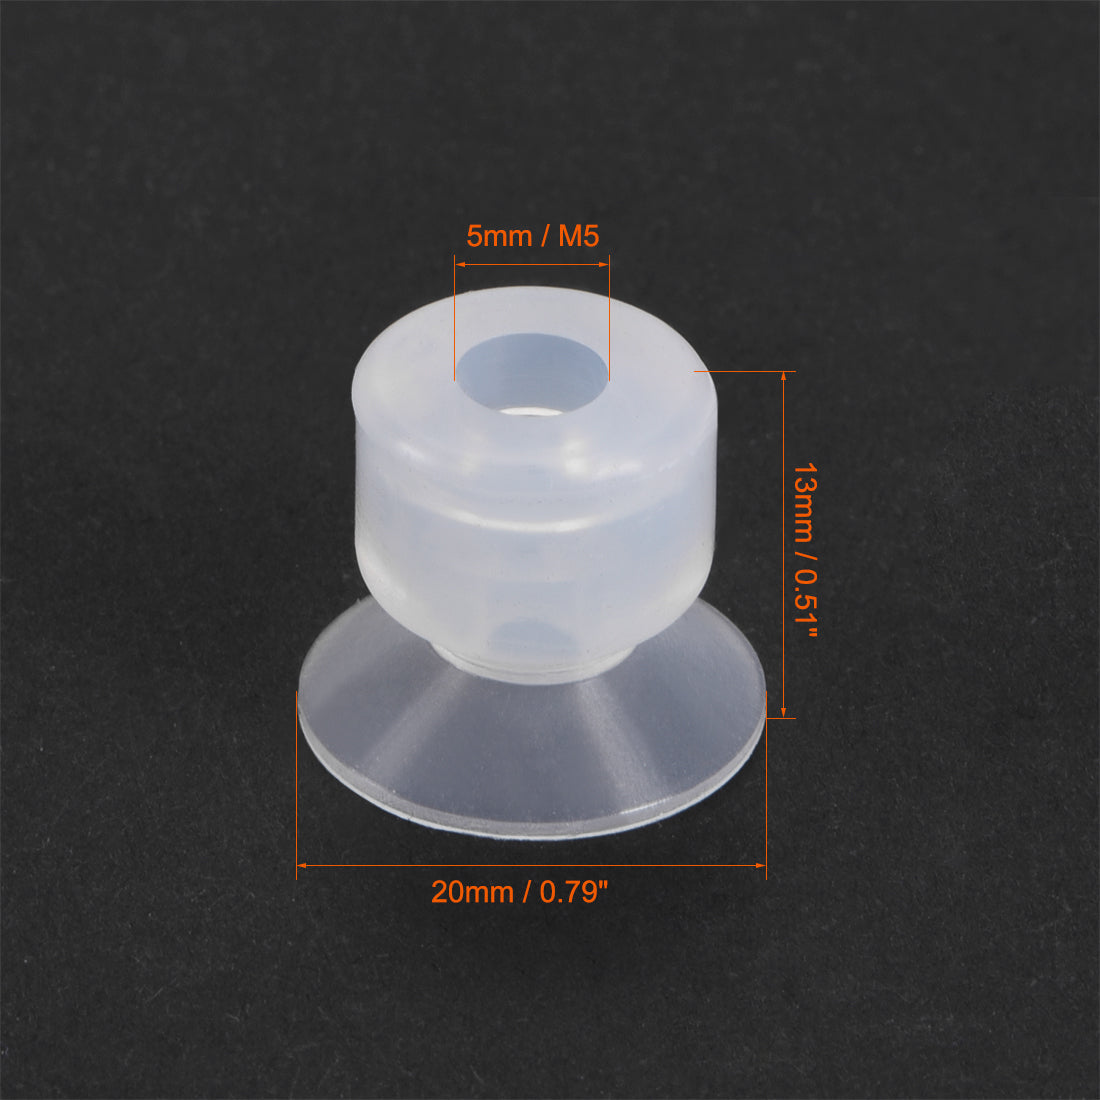 uxcell Uxcell Clear White Soft Silicone Waterproof  Miniature Vacuum Suction Cup 20mmx5mm Bellows Suction Cup,4pcs